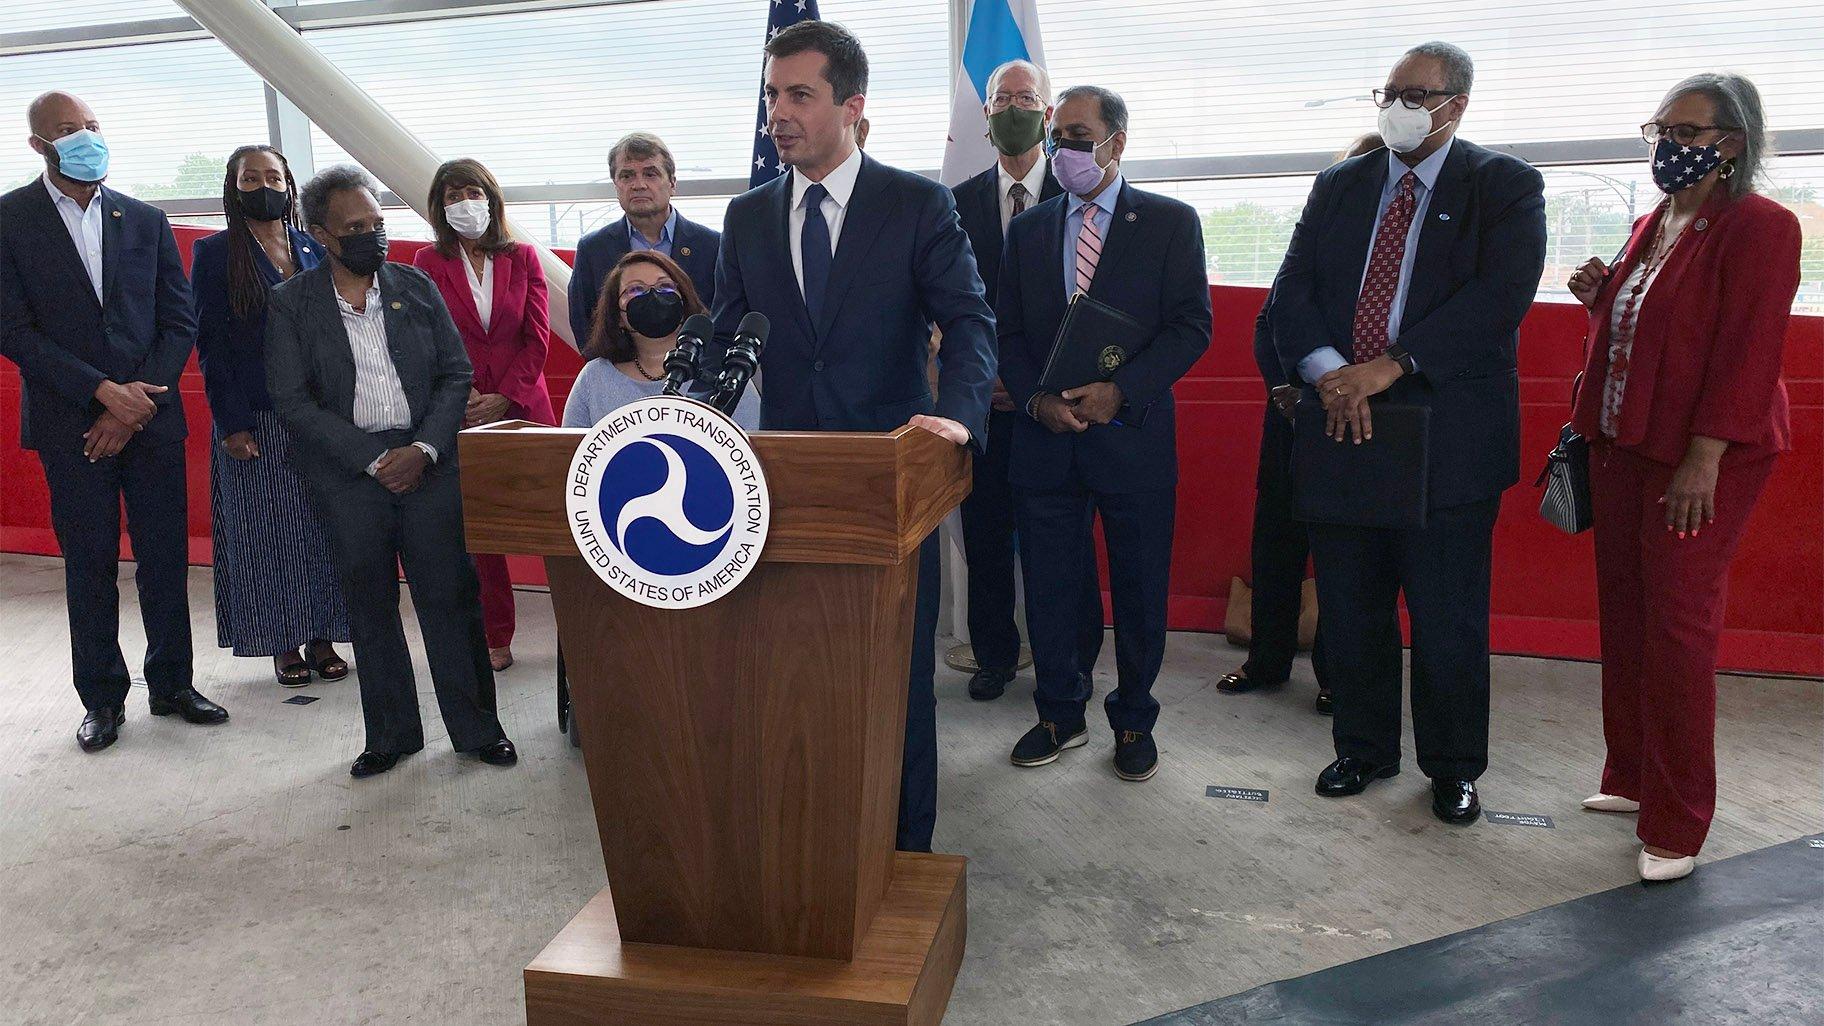 Secretary of Transportation Pete Buttigieg tours the 95th/Dan Ryan Red Line CTA station with Mayor Lori Lightfoot, CTA President Dorval Carter, Sens. Dick Durbin and Tammy Duckworth, and Democratic members of Illinois’ congressional delegation to promote President Joe Biden’s infrastructure plan on July 16, 2021. (WTTW News)